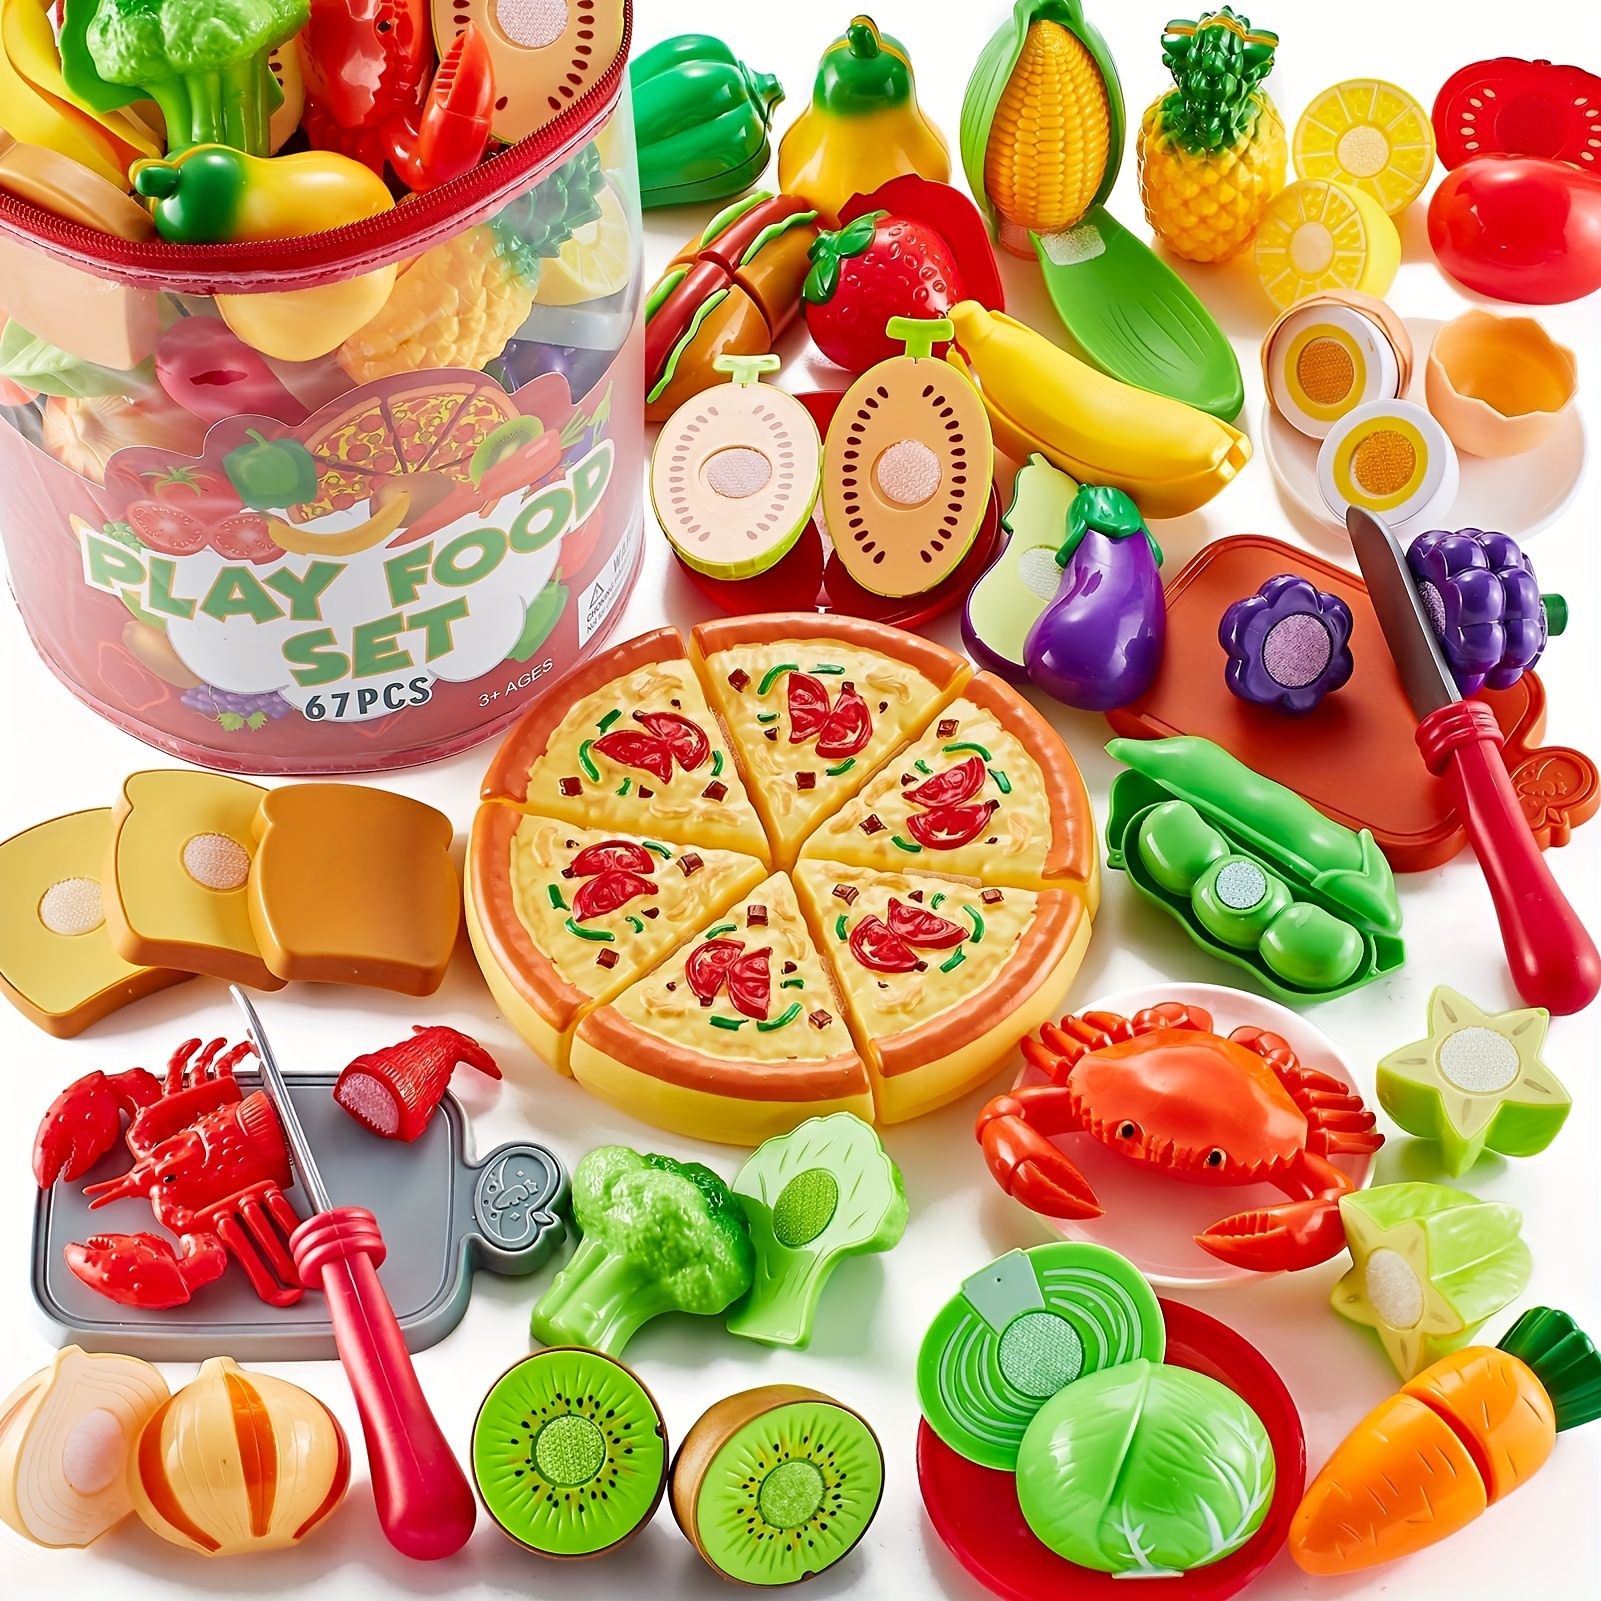 

67pcs Pack Of Kids Kitchen Simulation Toy Food Set, Pizza Toy Food And Cutting Simulation Food - Fruits And Vegetables, Kitchen Toy Accessories, Simulation Food Toy Eid Mubarak Gifts